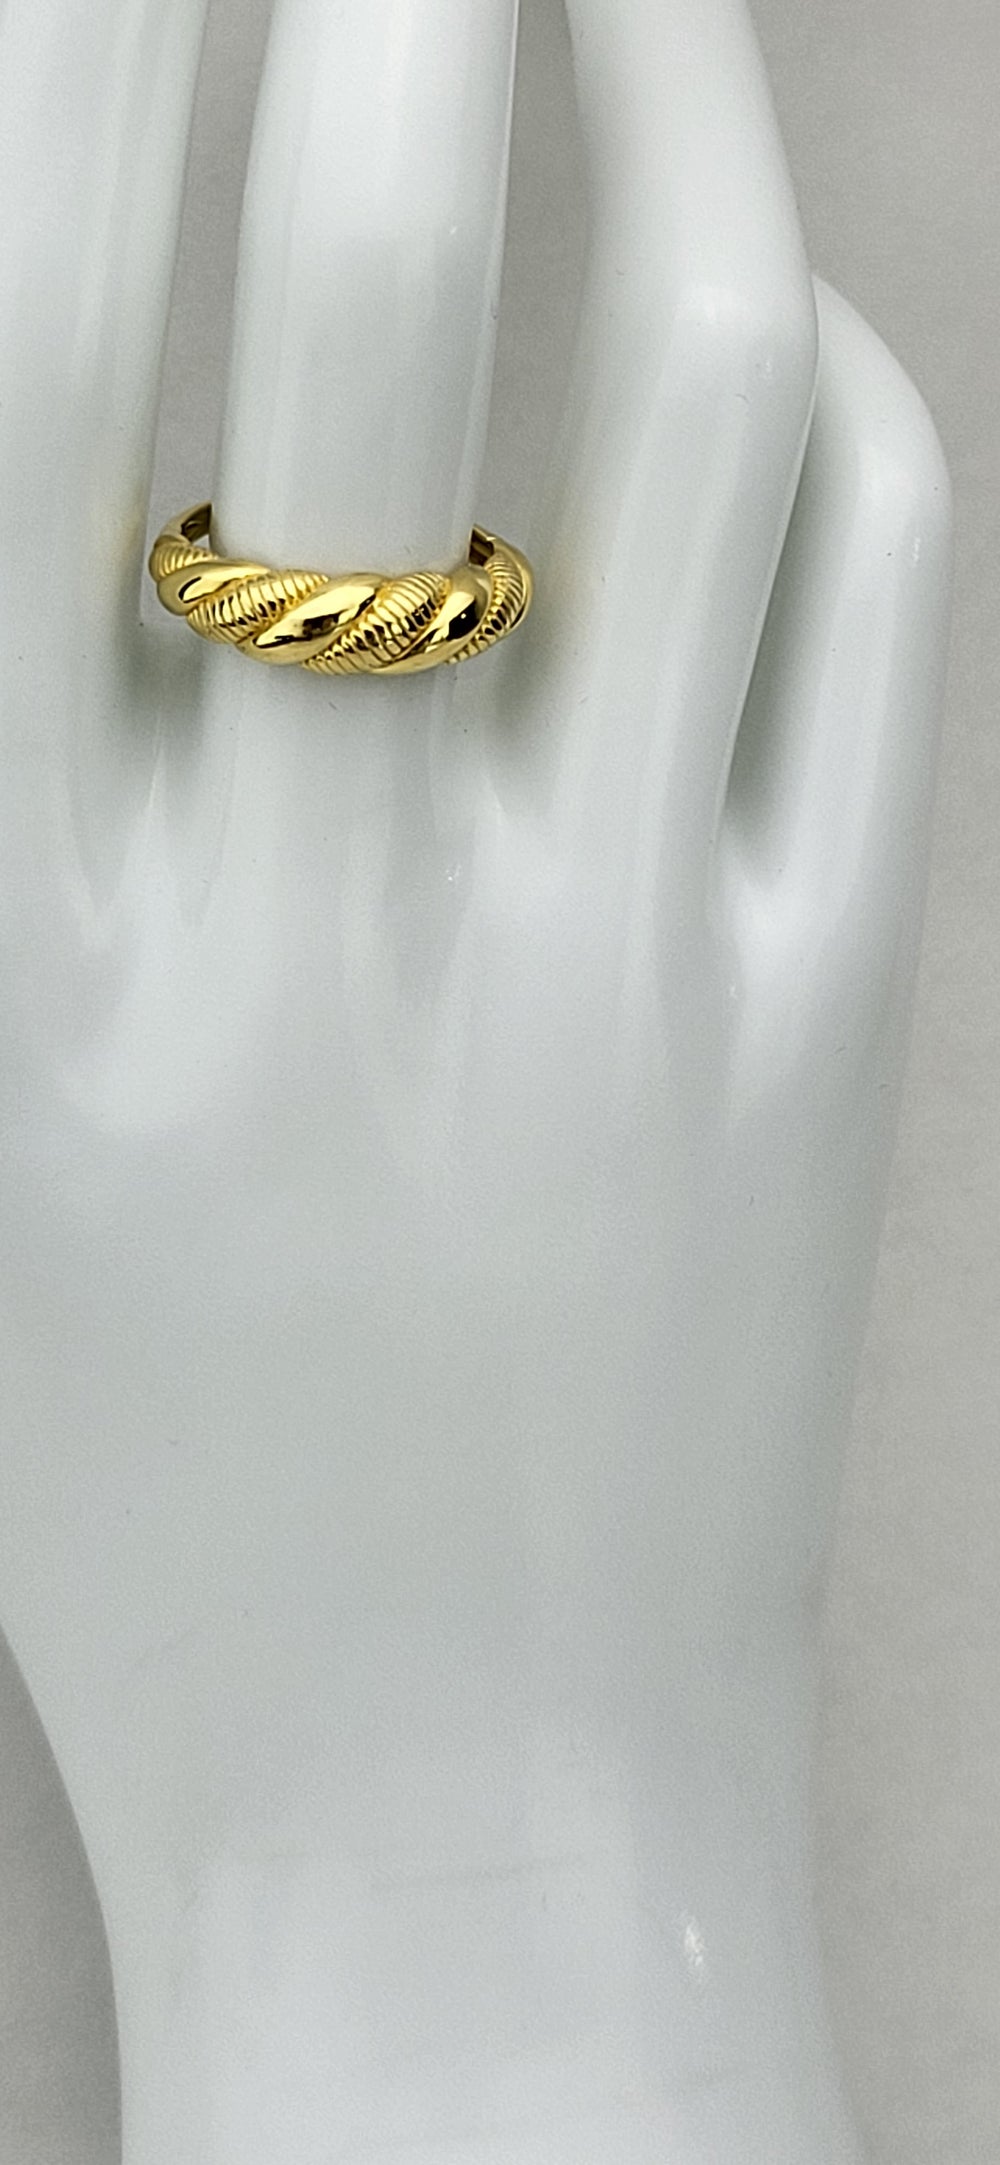 Experience the opulence of our exquisite 14 karat gold plated sterling silver ring. Its polished and textured twist design exudes an air of modern sophistication. Tapering from 6.5mm-2mm, this luxurious piece is available in whole sizes 6-9. Meticulously crafted from .925 sterling silver, it is a truly indulgent addition to any discerning collection.